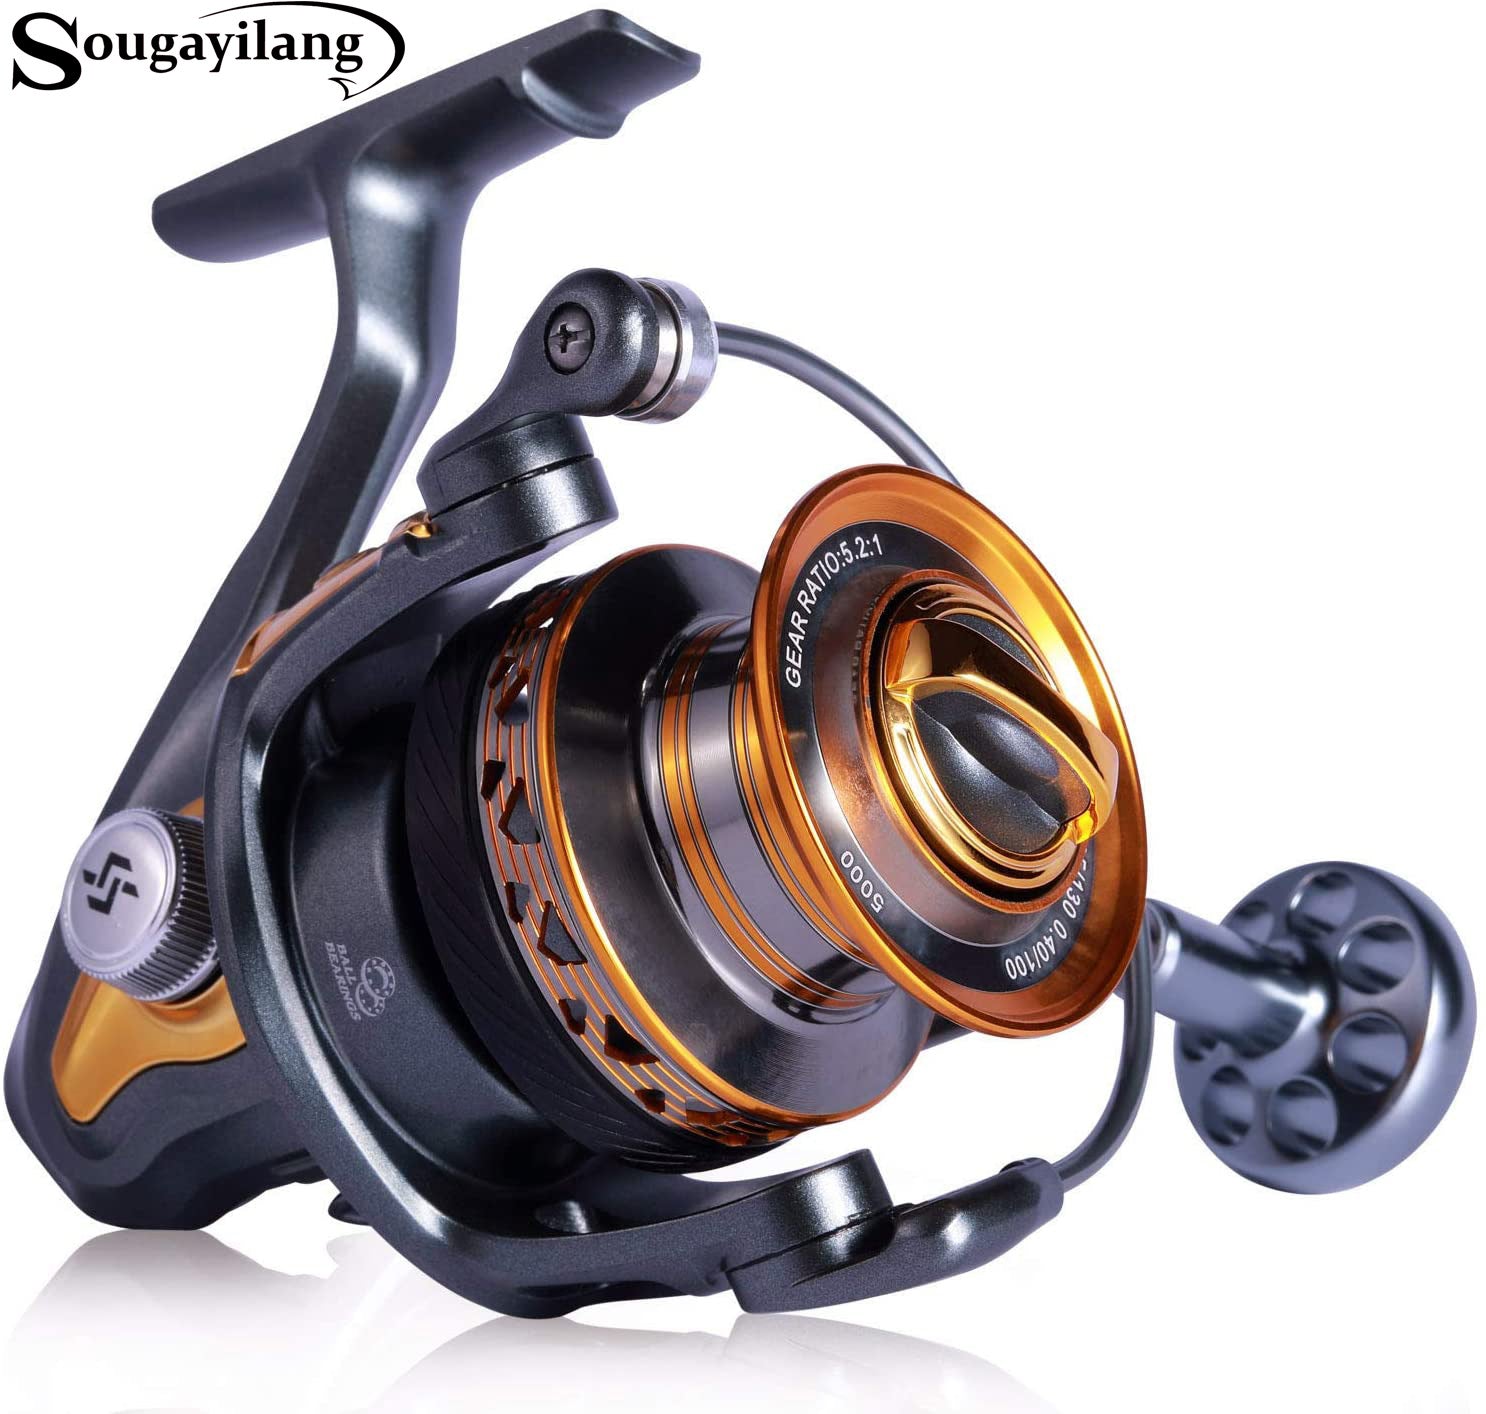 Sougayilang Spinning Reels, Light Weight and Ultra Smooth Powerful Spinning  Reels for Saltwater and Freshwater Fishing-4000 : : Sports,  Fitness & Outdoors